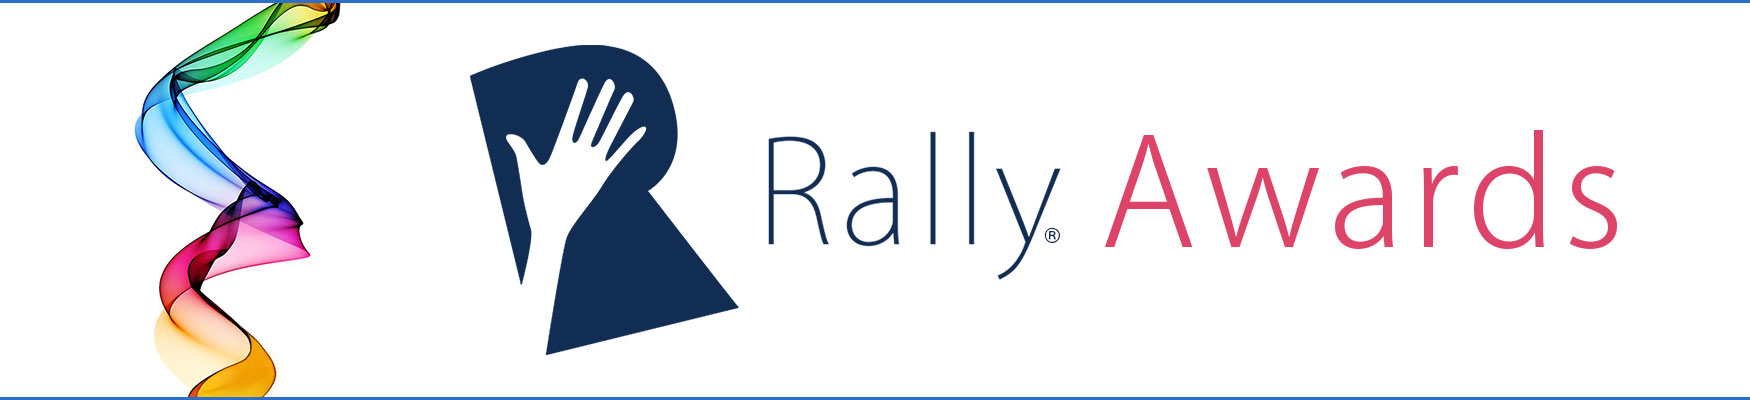 2020 Rally Awards to recognize excellence in recruitment marketing and employer branding